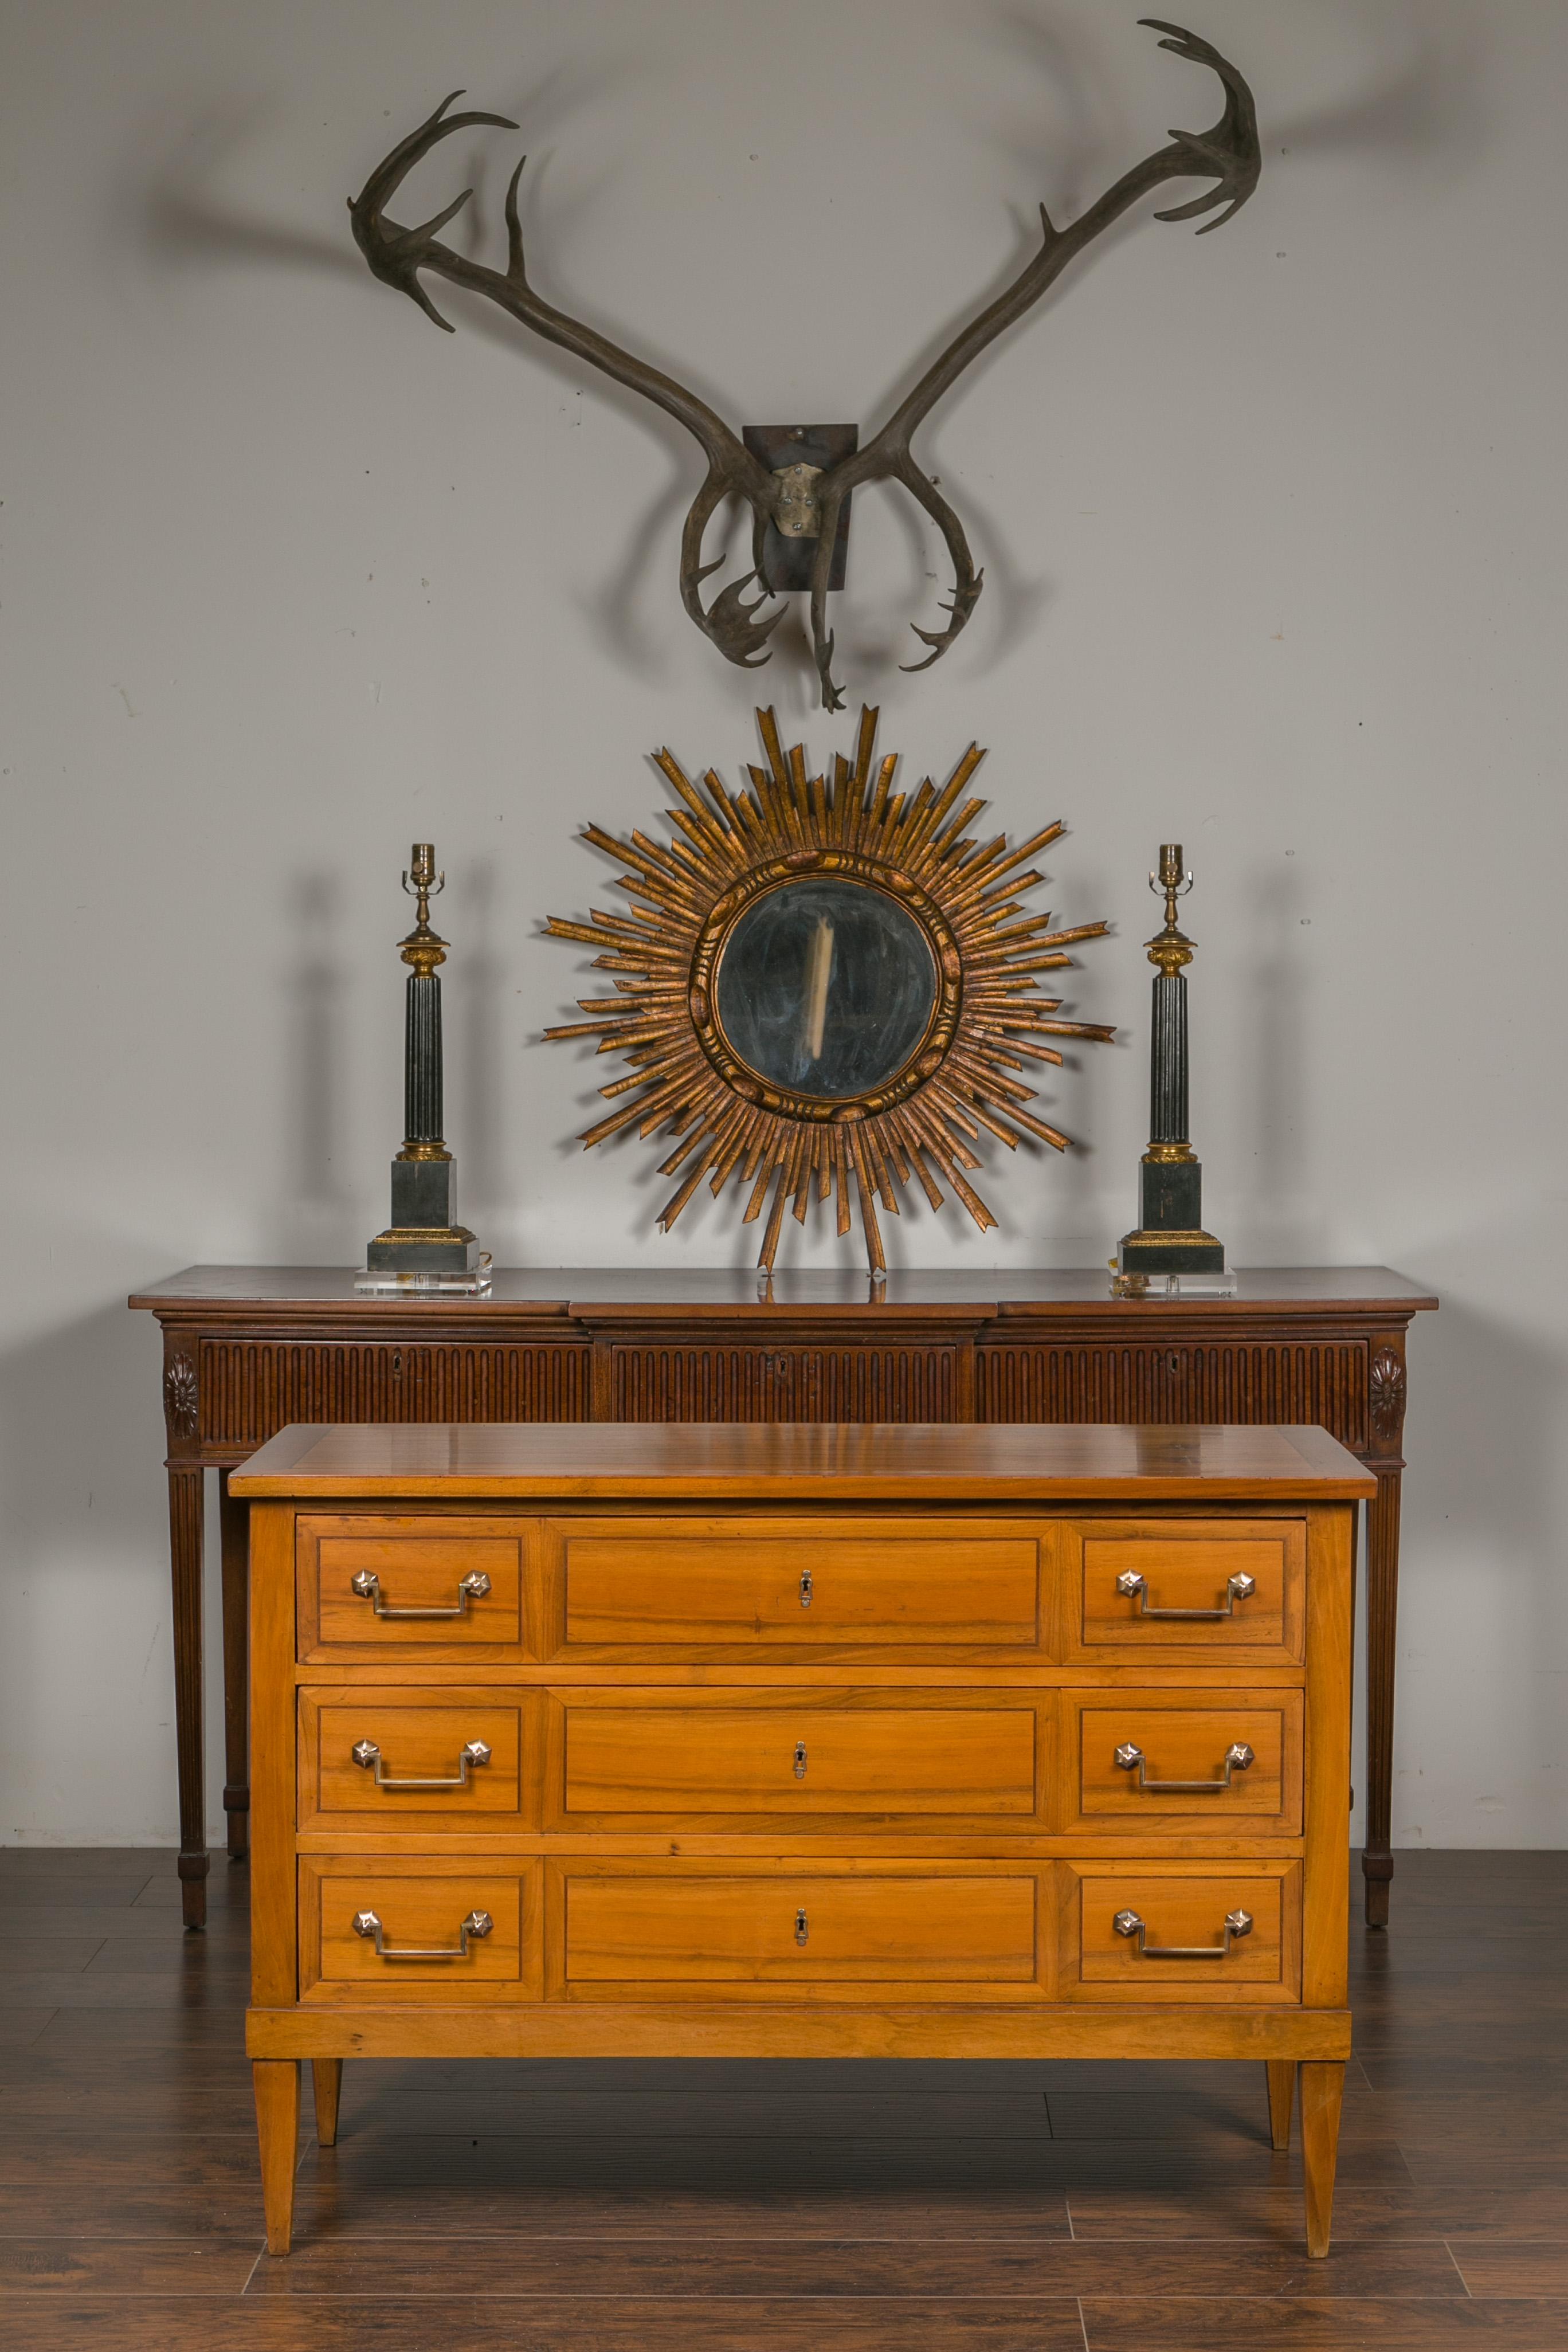 A French Directoire style walnut commode from the early 20th century, with three drawers, banding and tapered legs. Born in France during the early years of the 20th century, this Directoire style commode features a rectangular top sitting above